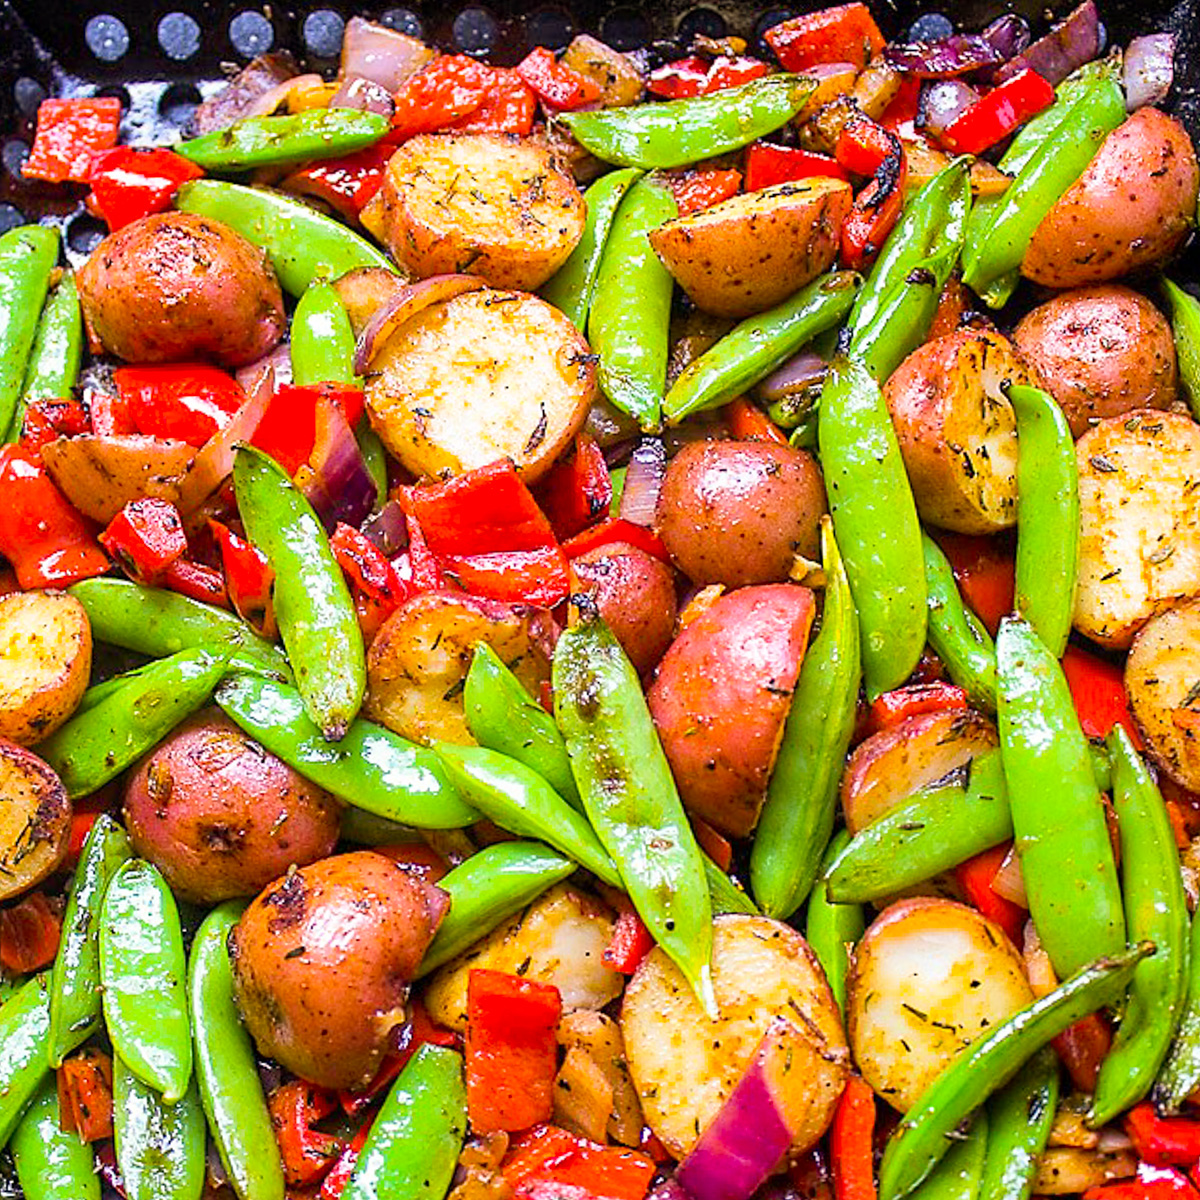 Grilled Potatoes and Veggies